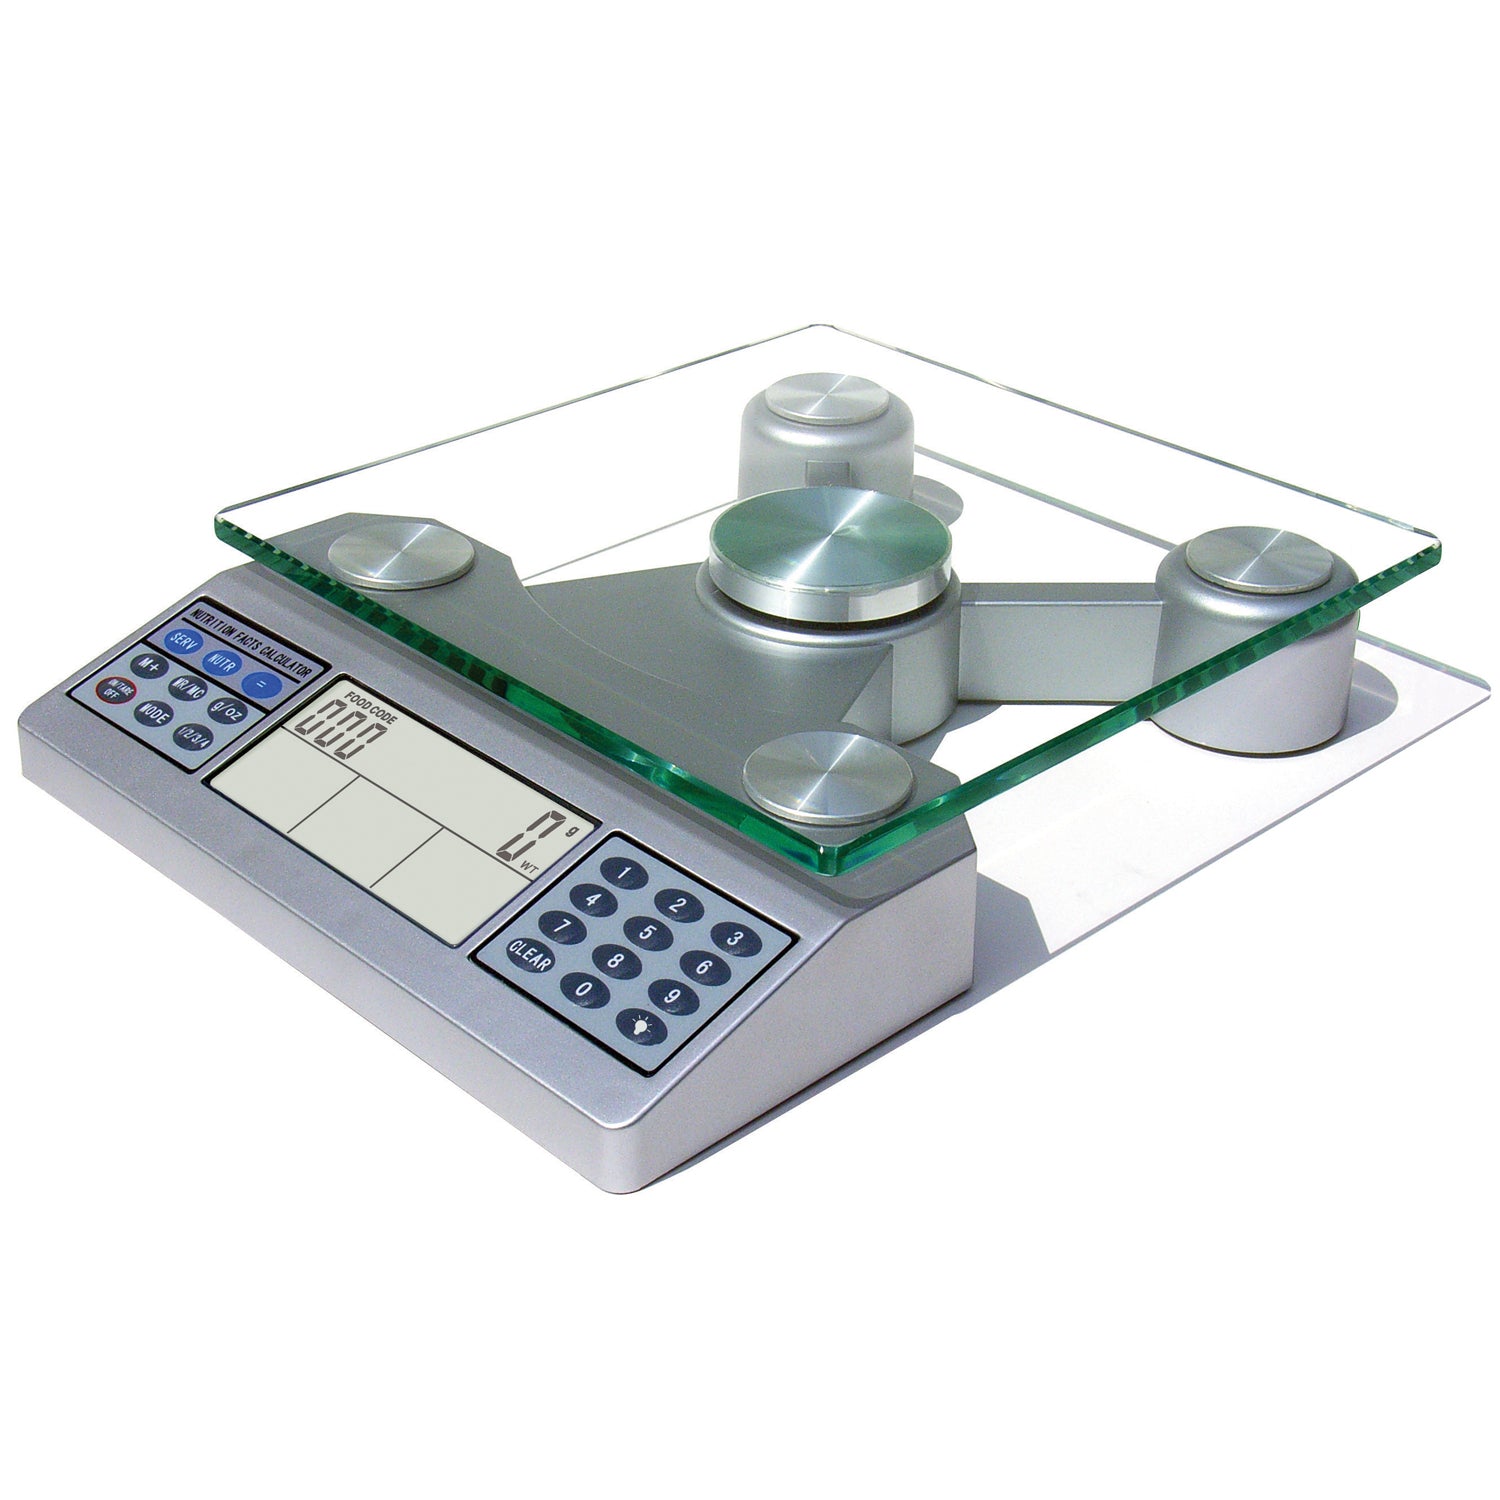 Nutrition Food Scale @